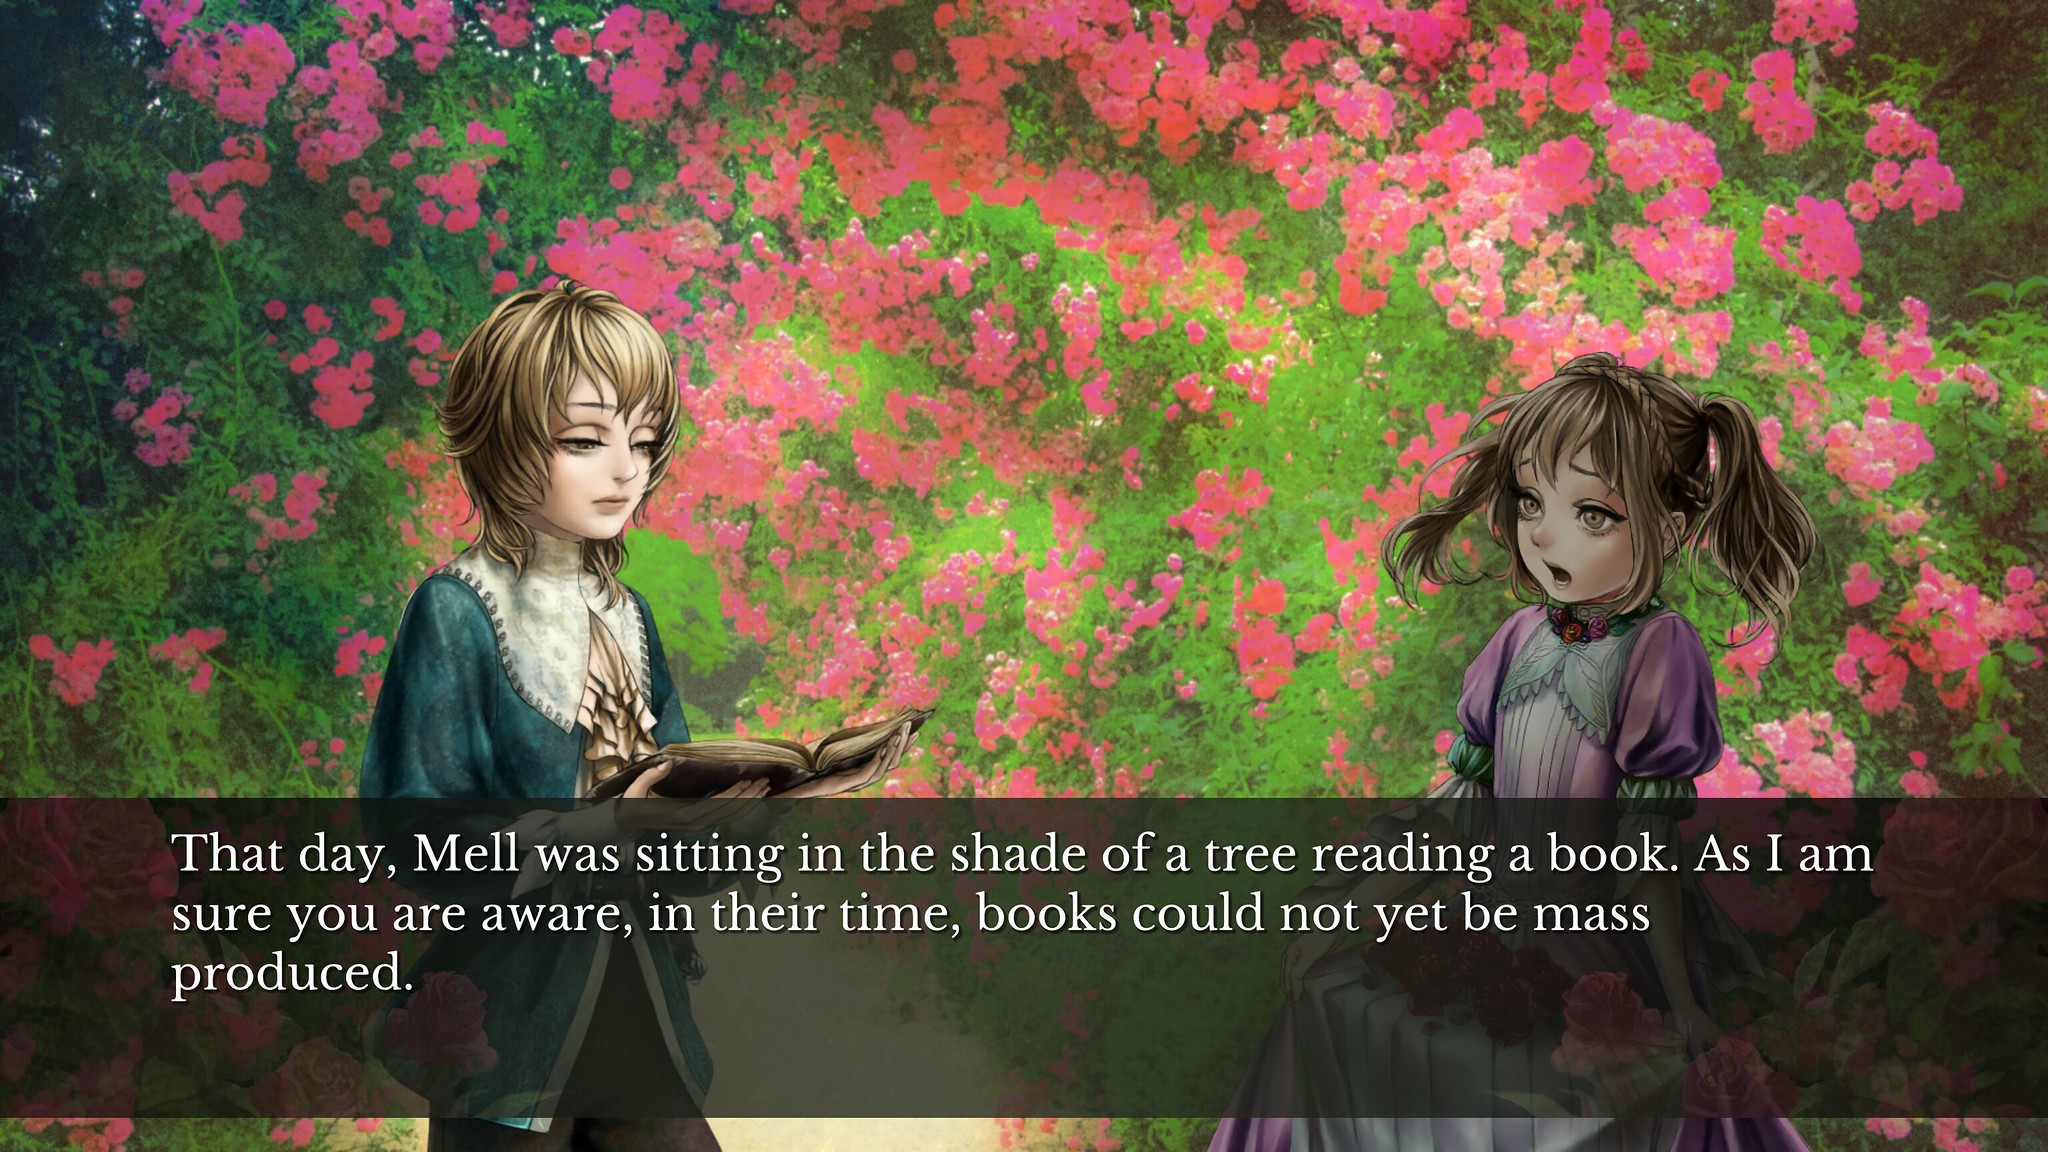 Visual Novel The House in Fata Morgana Coming to the PS4 and PS Vita Soon